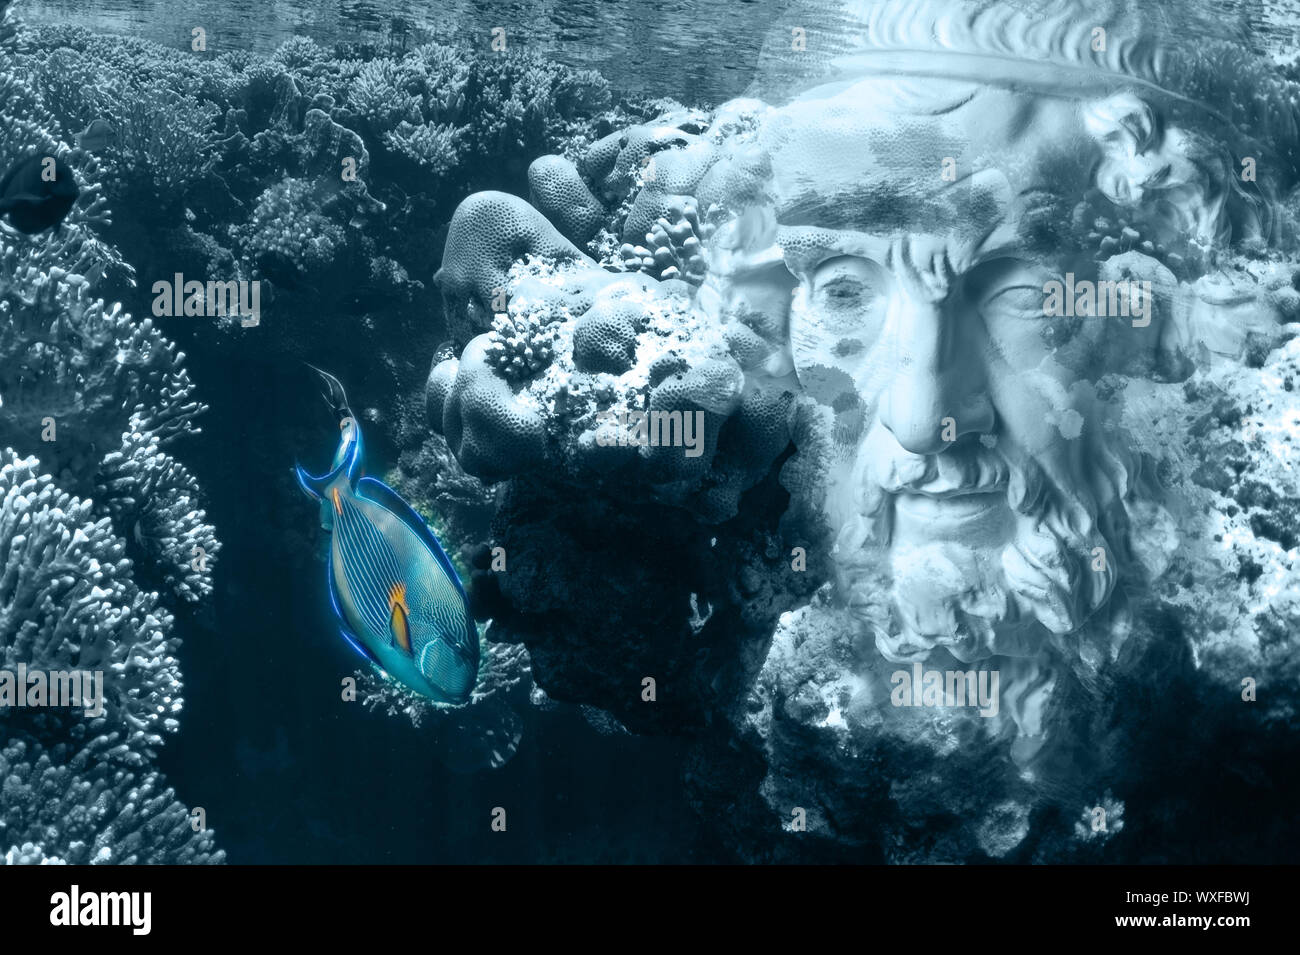 Face of ancient statue on a underwater background with corals and fish. Art, adventure, underwater archeology concept. Stock Photo